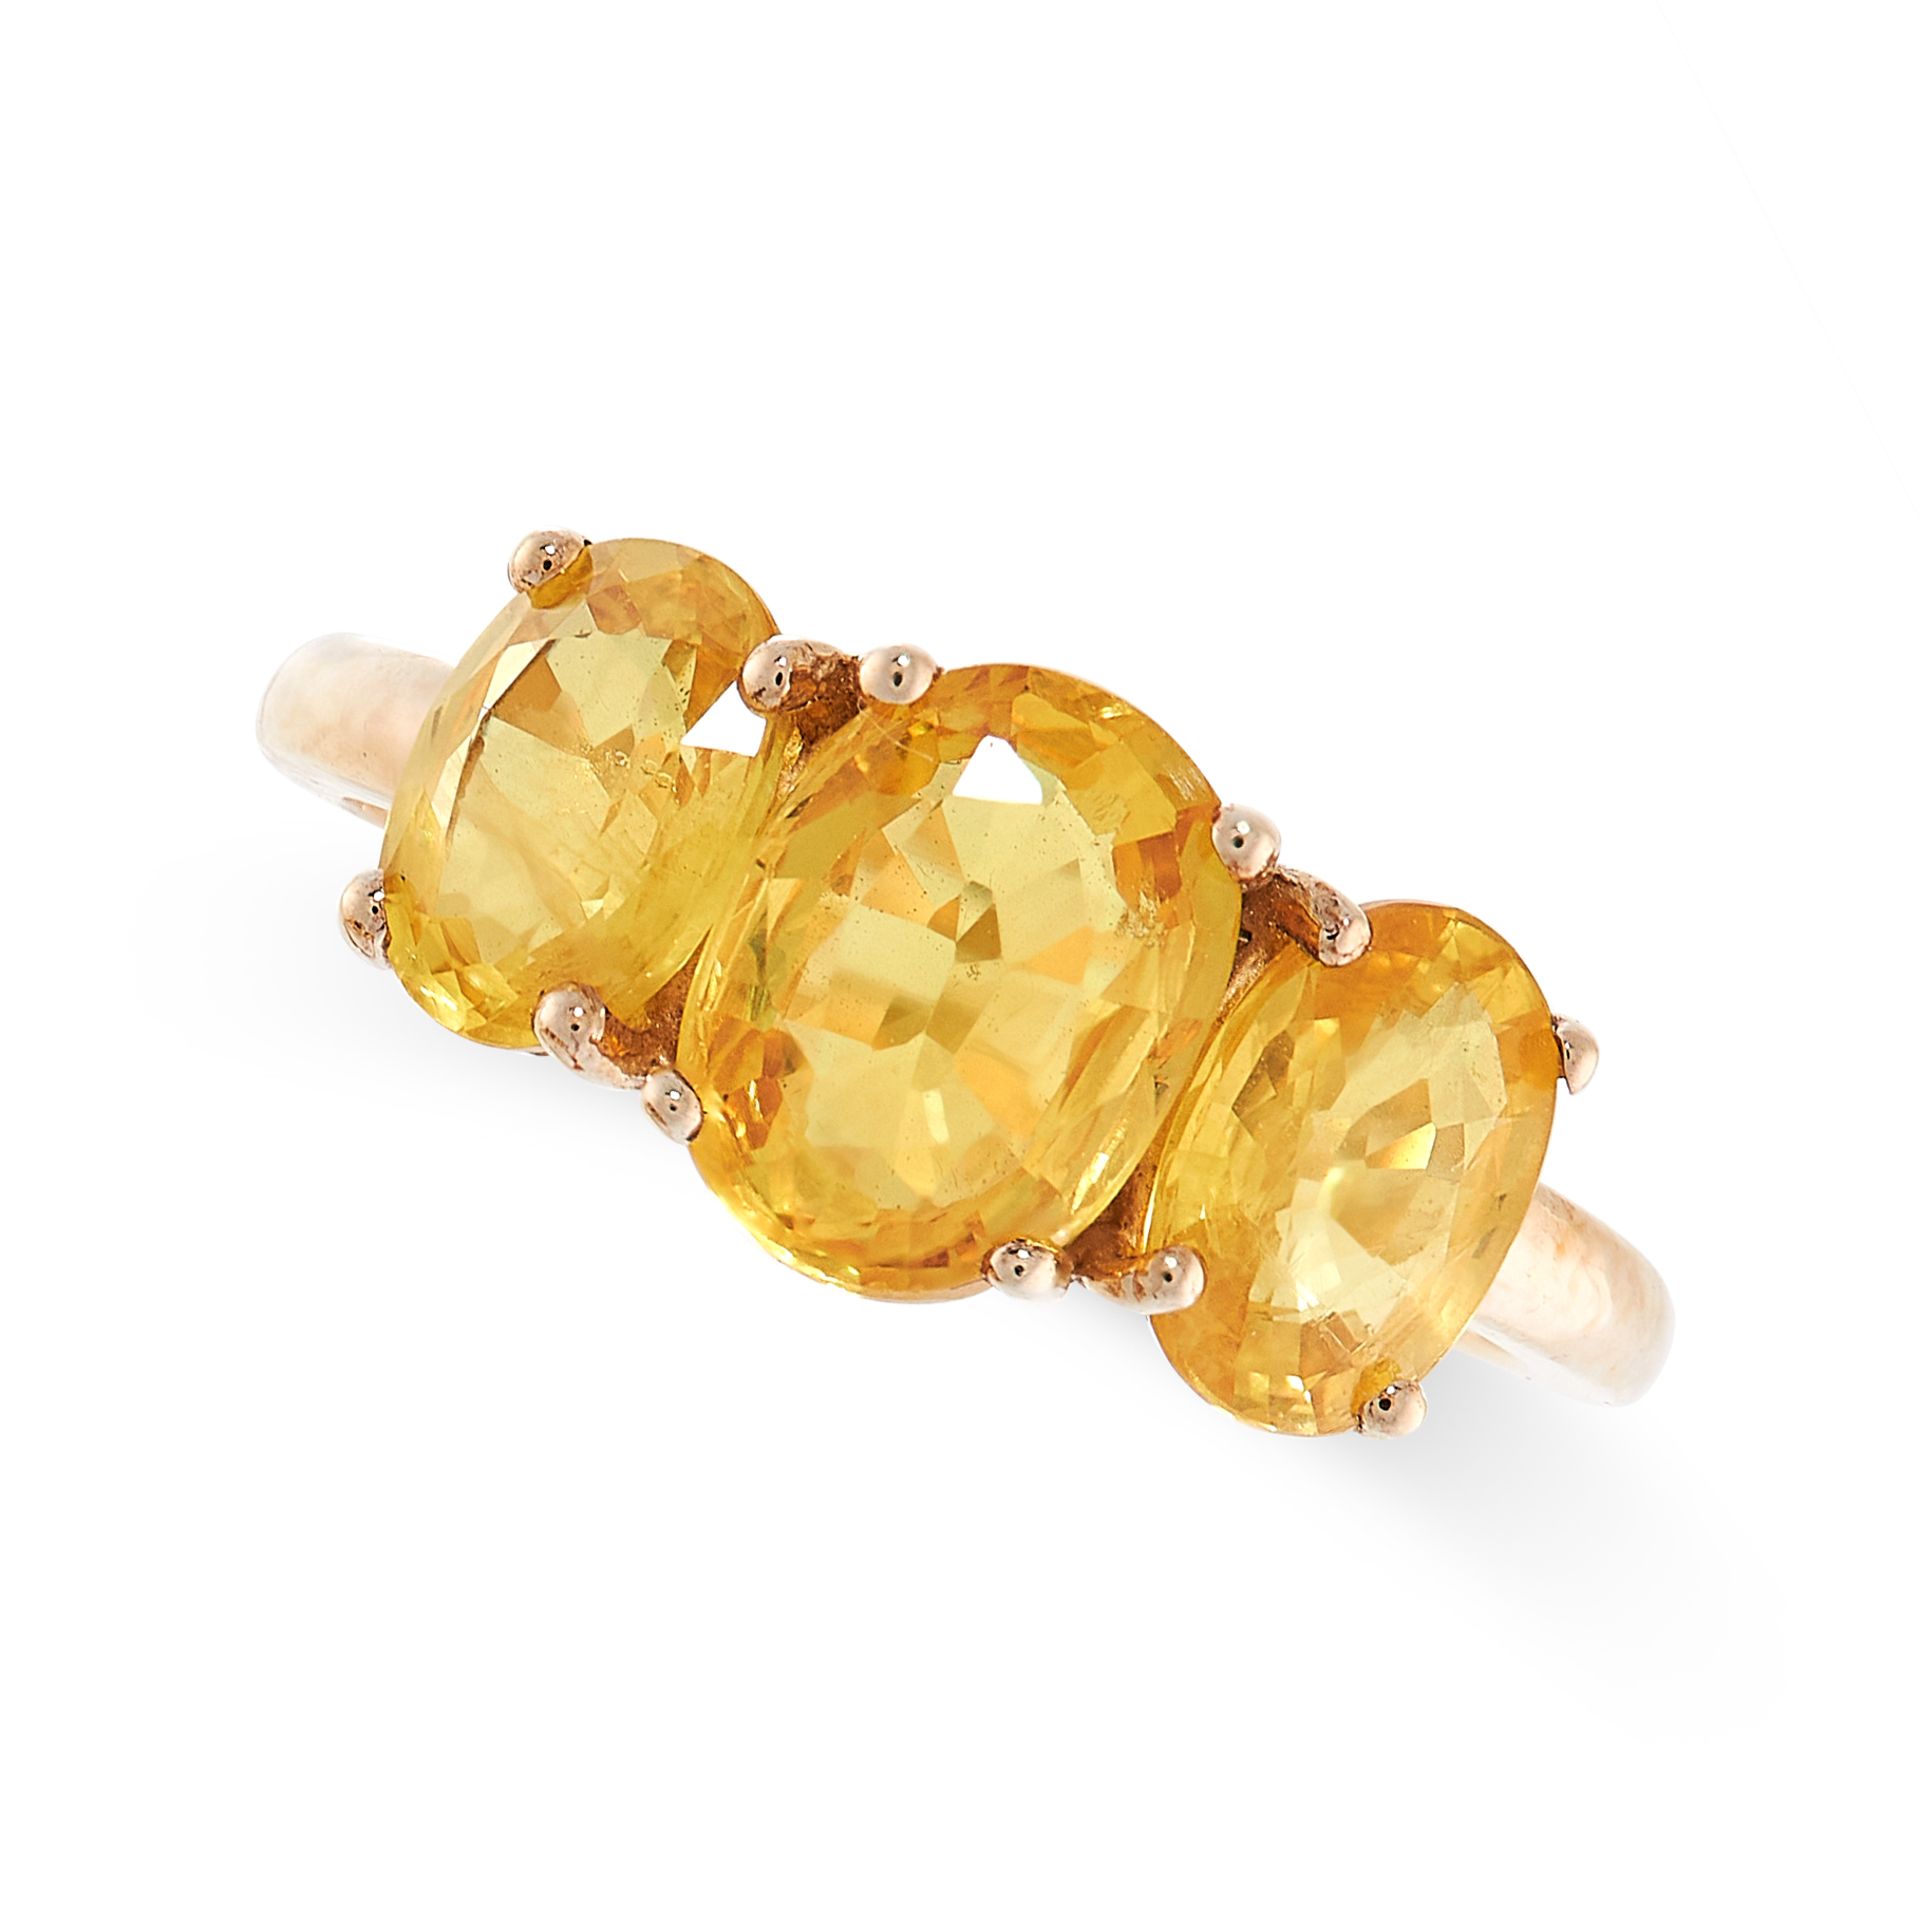 YELLOW SAPPHIRE RING claw-set with three oval yellow sapphires, size L1/2 / 6, unmarked, largest